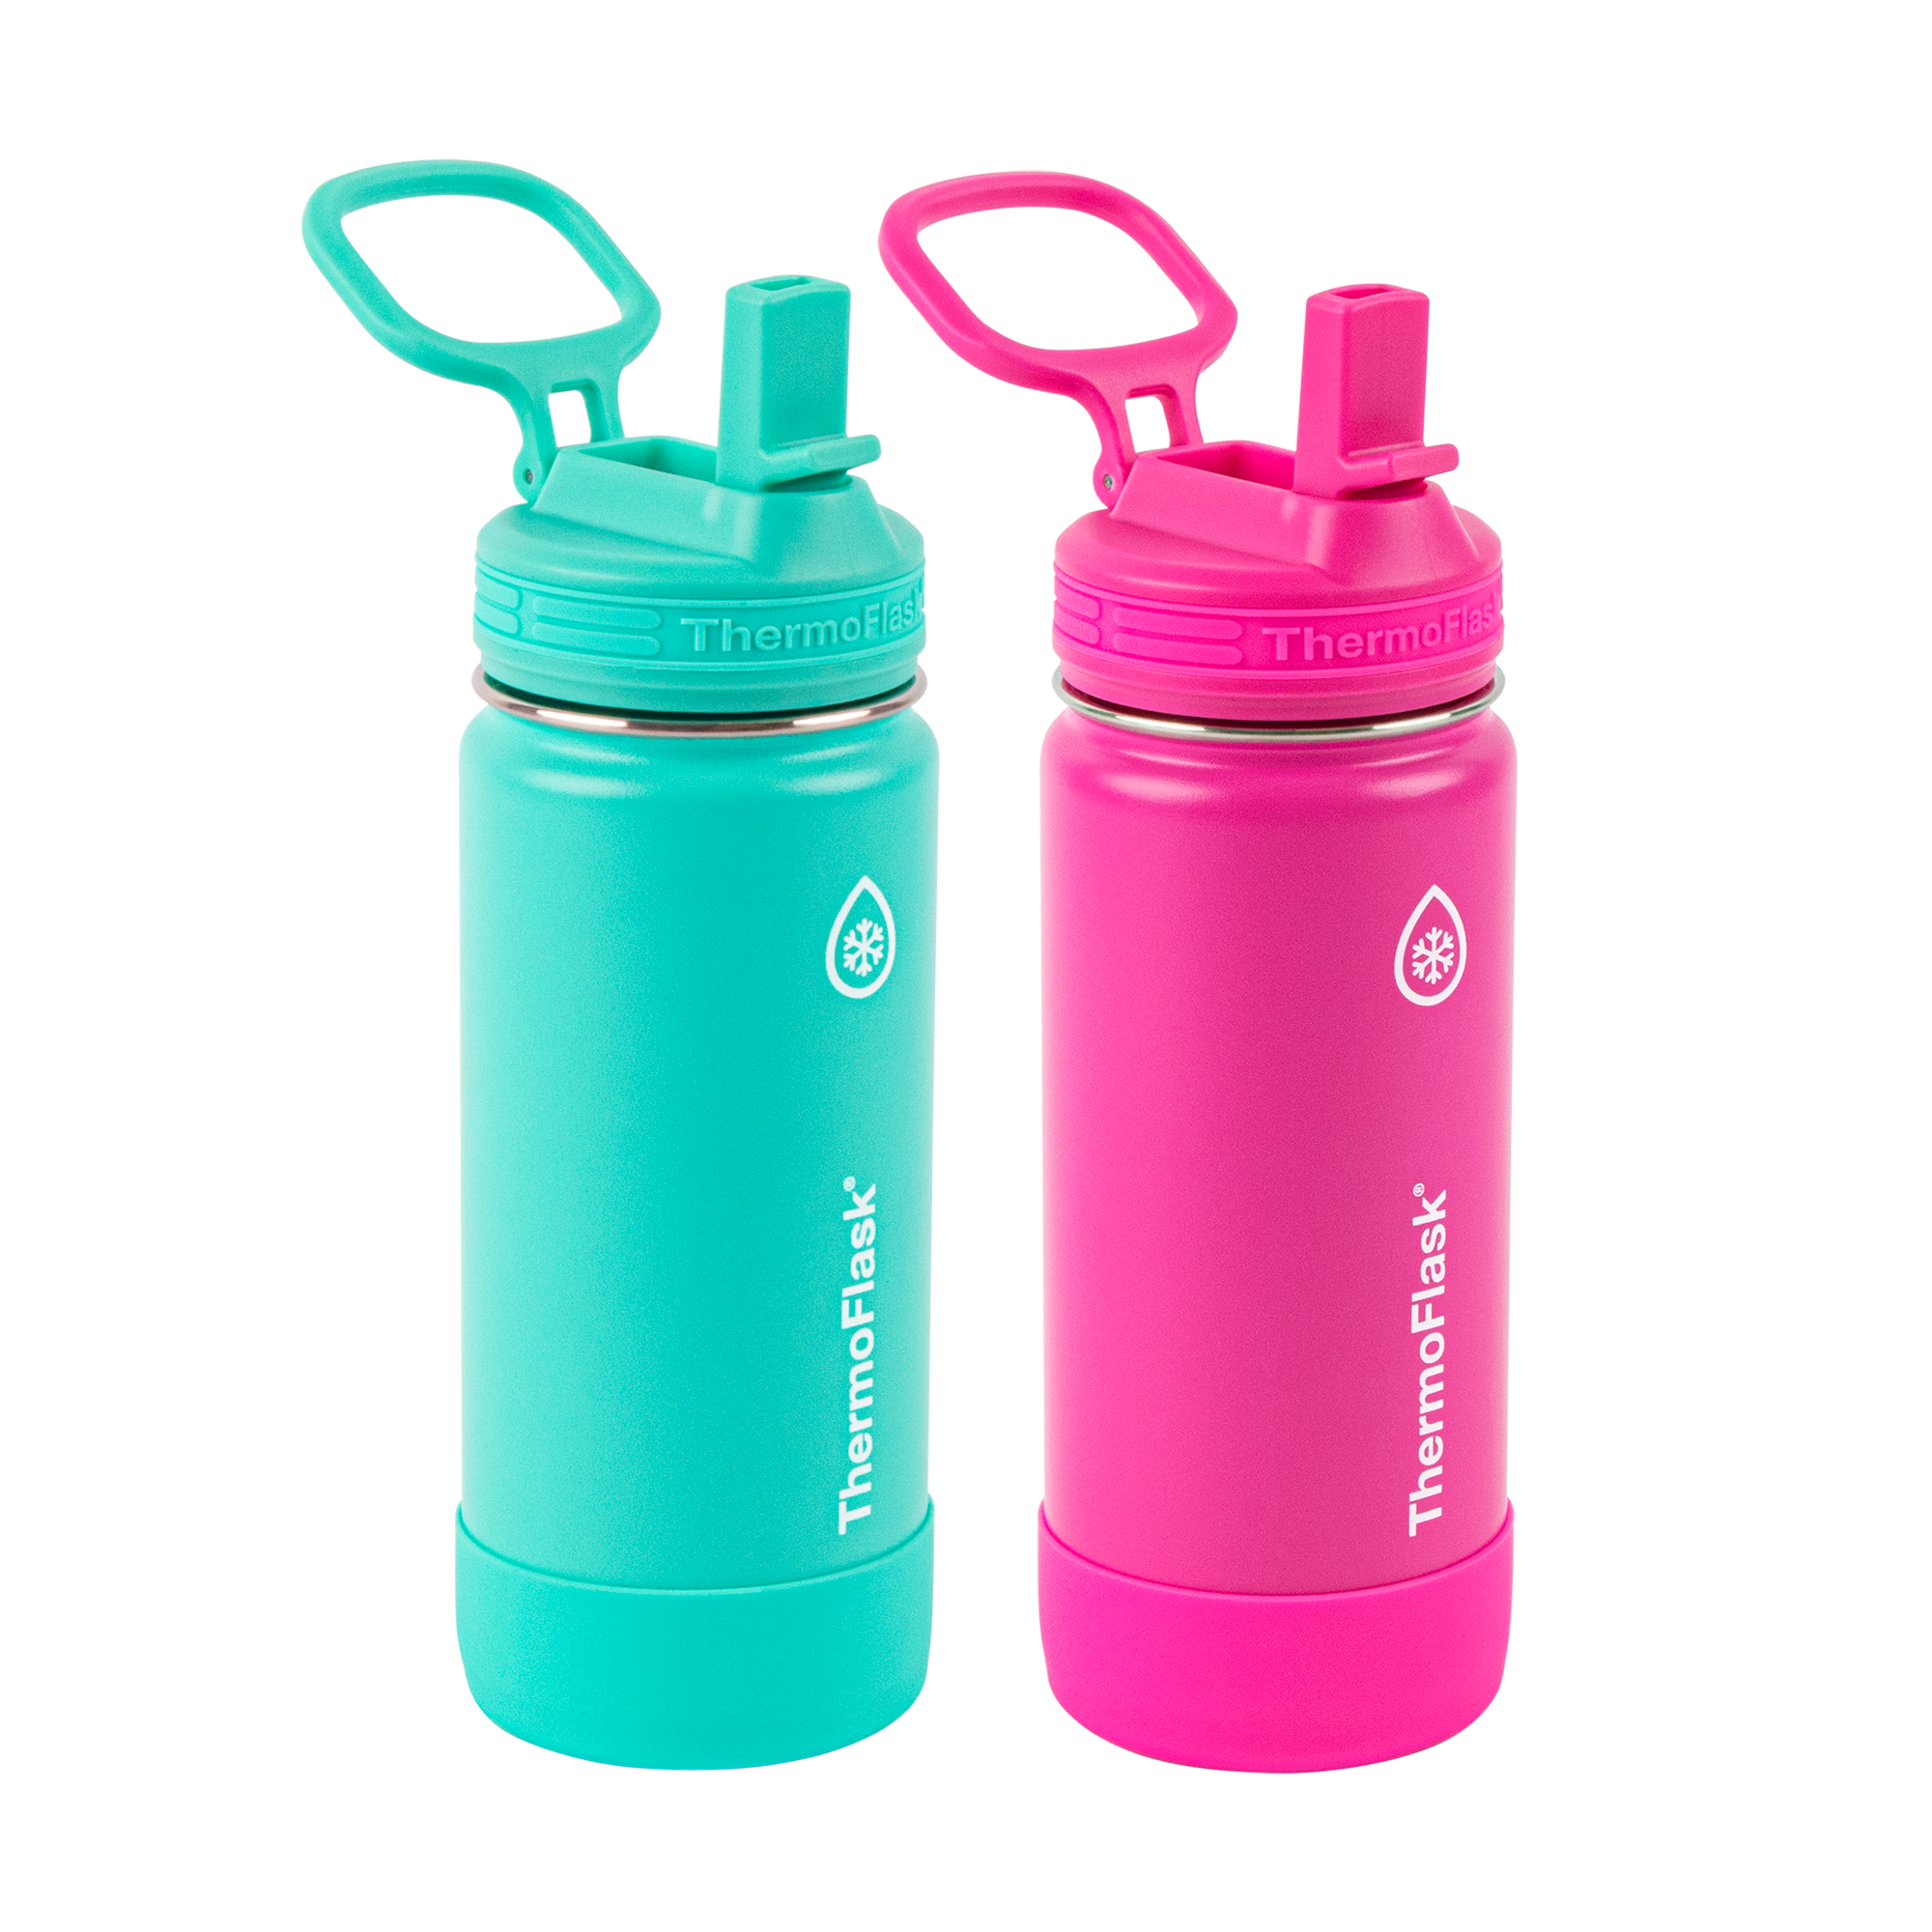 Pink school bus water bottle for my toddler who loves anything